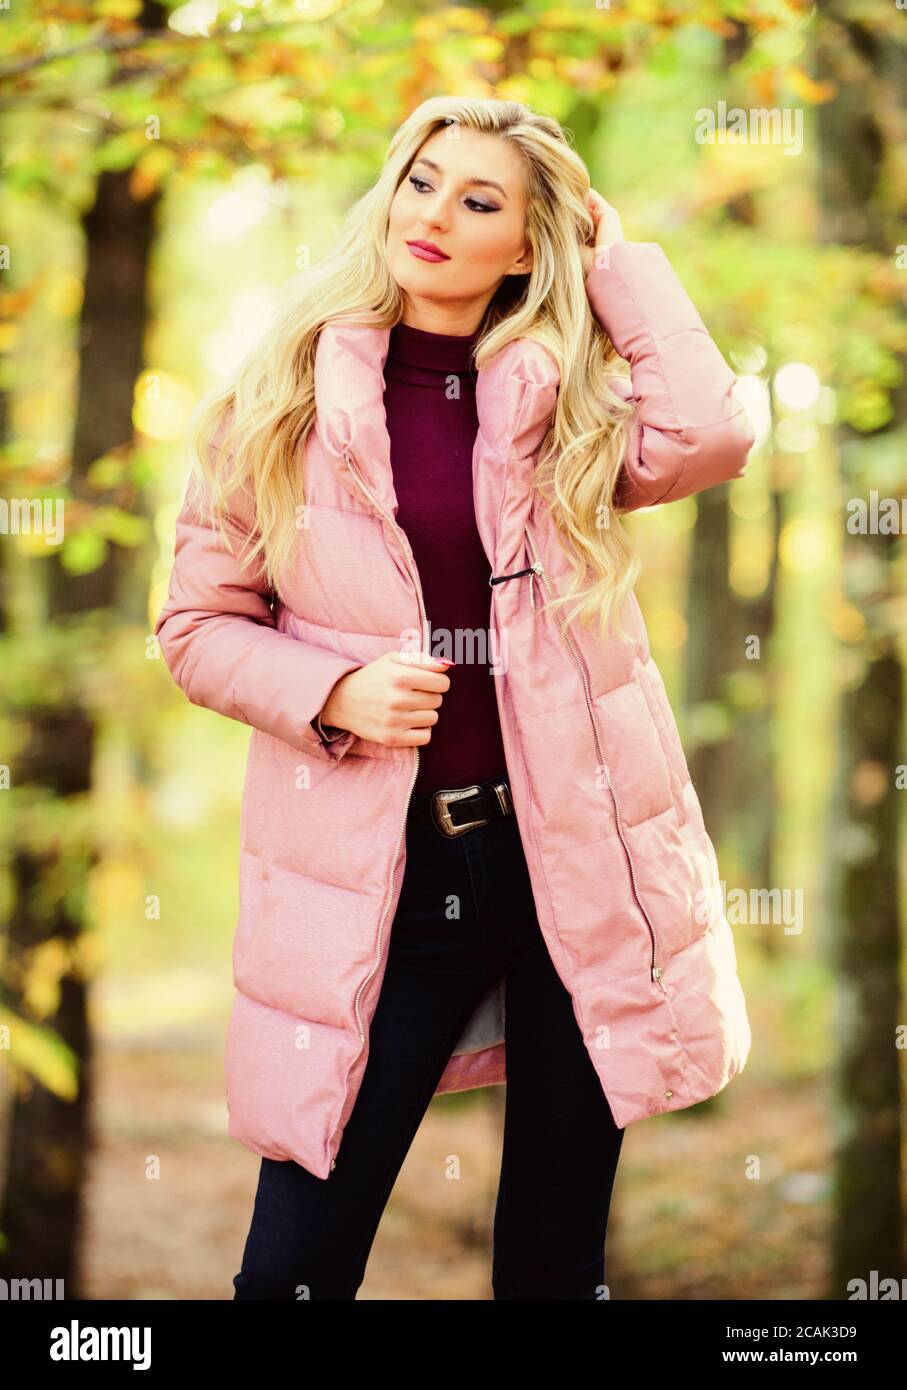 How To Rock Puffer Jacket Like Star. Puffer Fashion Trend Concept. Girl  Fashionable Blonde Walk in Autumn Park Stock Image - Image of attractive,  coat: 158270653